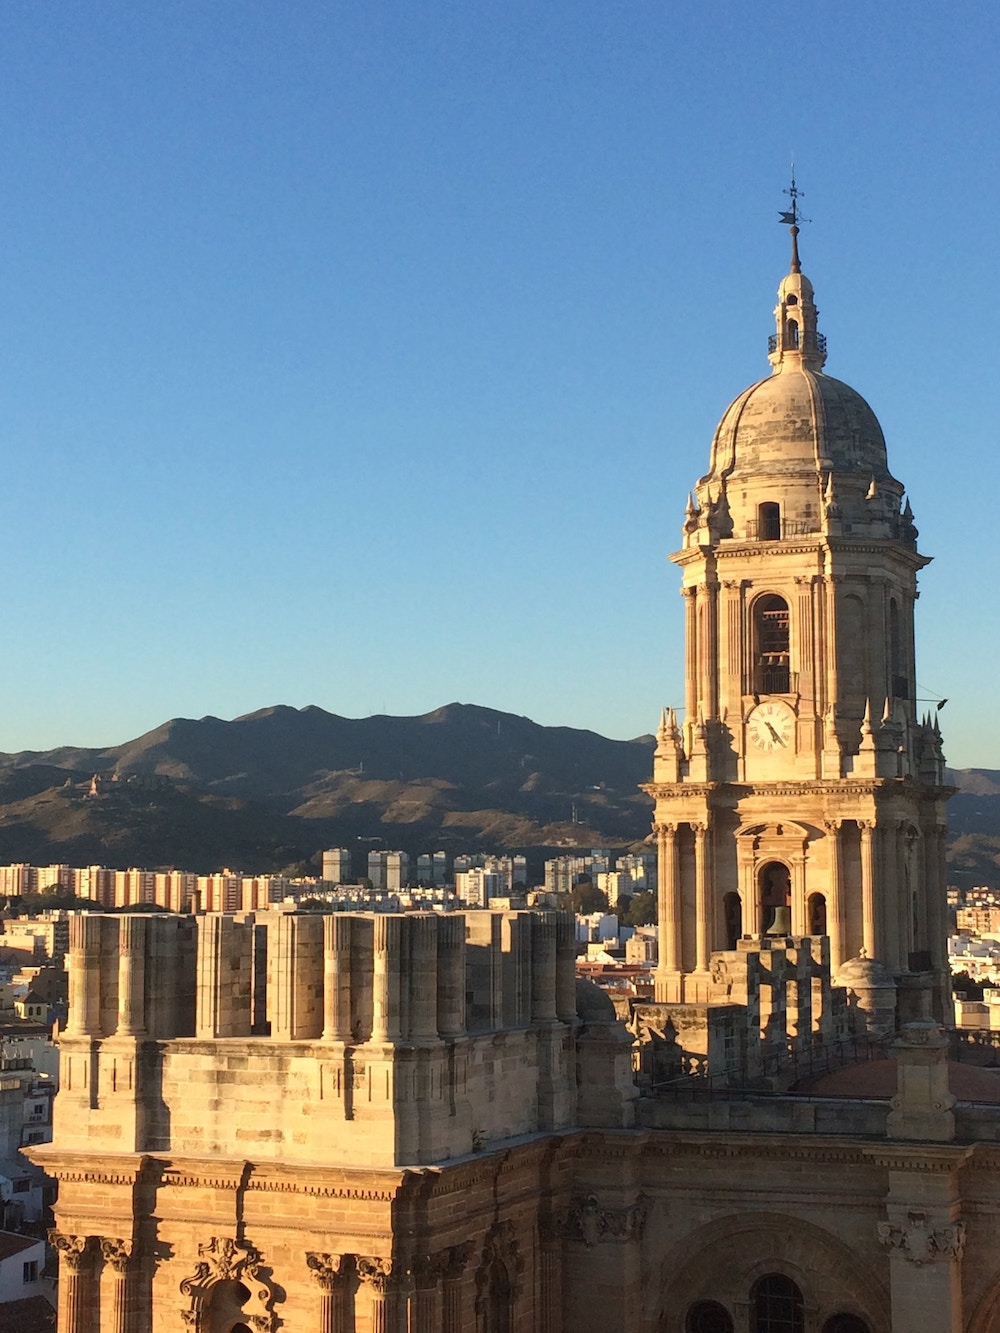 Malaga Cathedral - Iconic Landmark in Andalusia, Spain